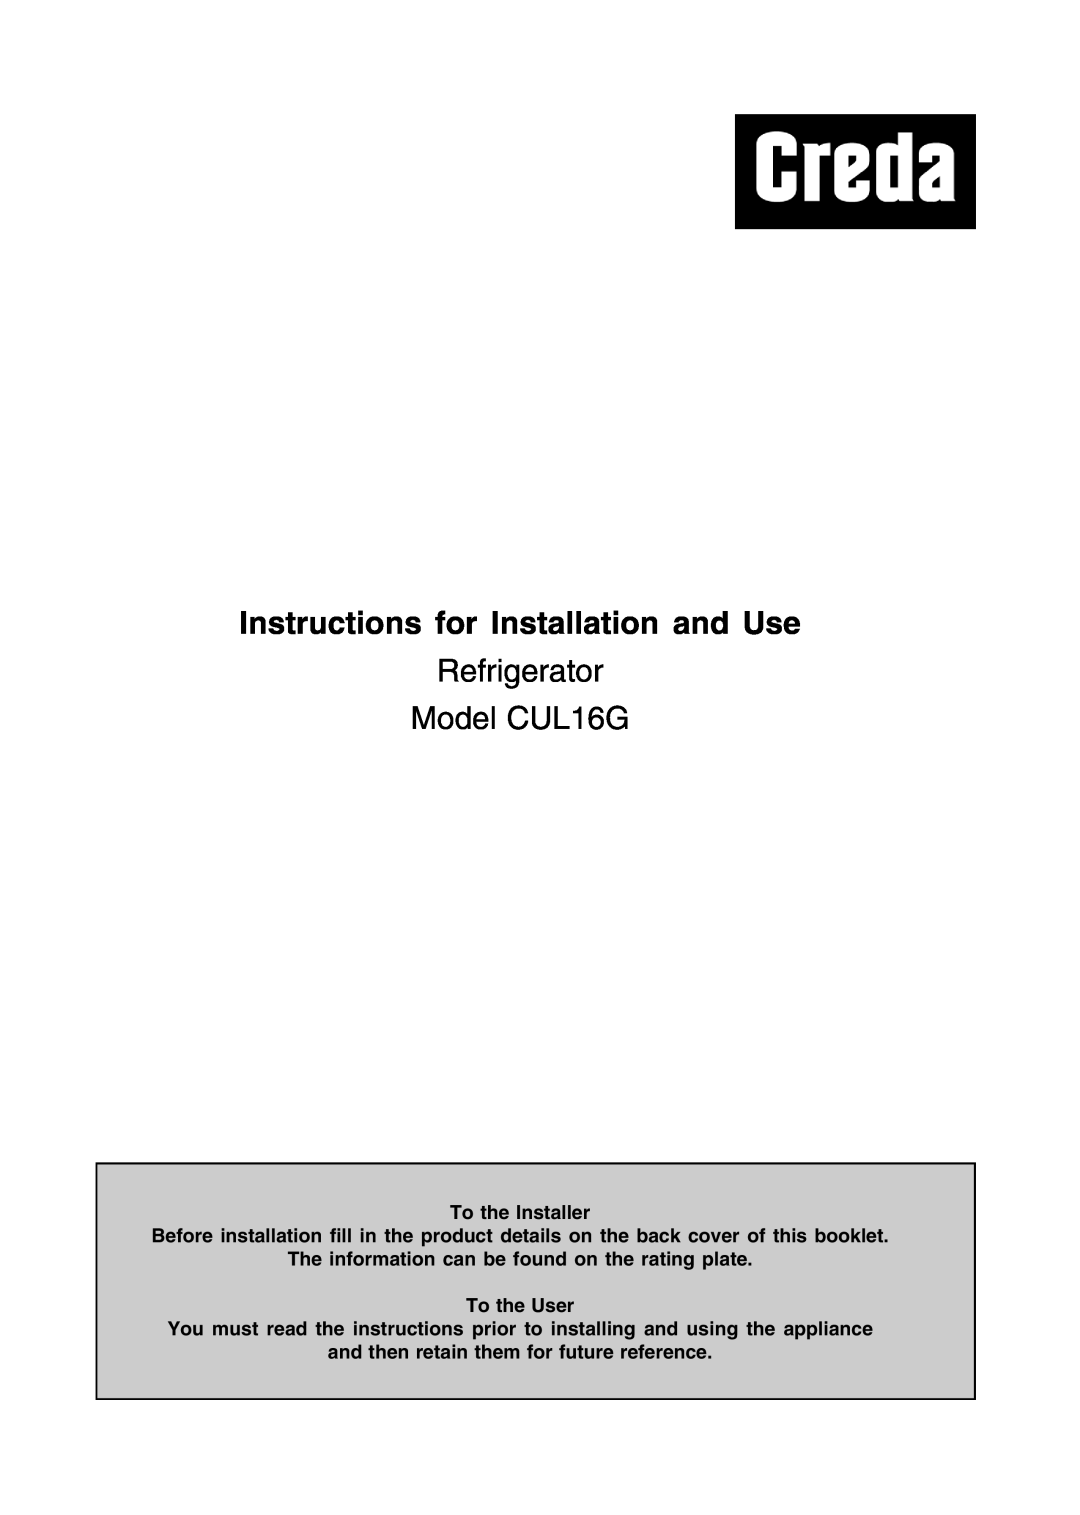 Creda manual Instructions for Installation and Use, Refrigerator Model CUL16G, To the Installer, To the User 